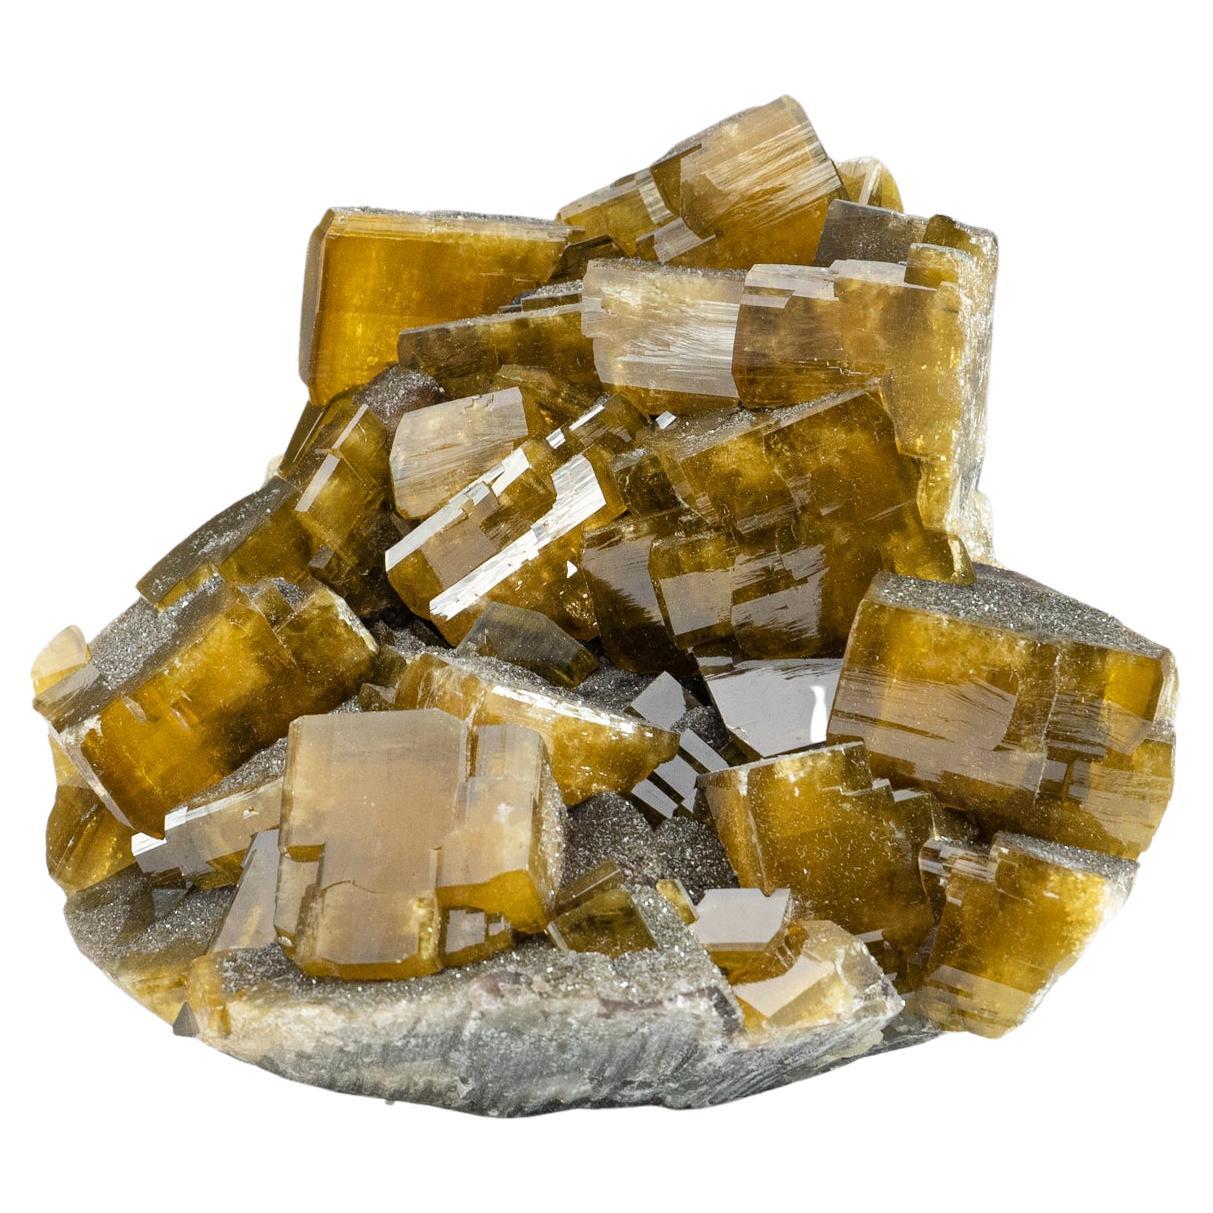 From Nandan County, Hechi, Guangxi, China

Complex intersecting formation of lustrous gem translucent golden barite crystals with lustrous faces and sharp modified rhombic faces.

8 lbs, Measures: 7 x 3.5 x 6 inches.